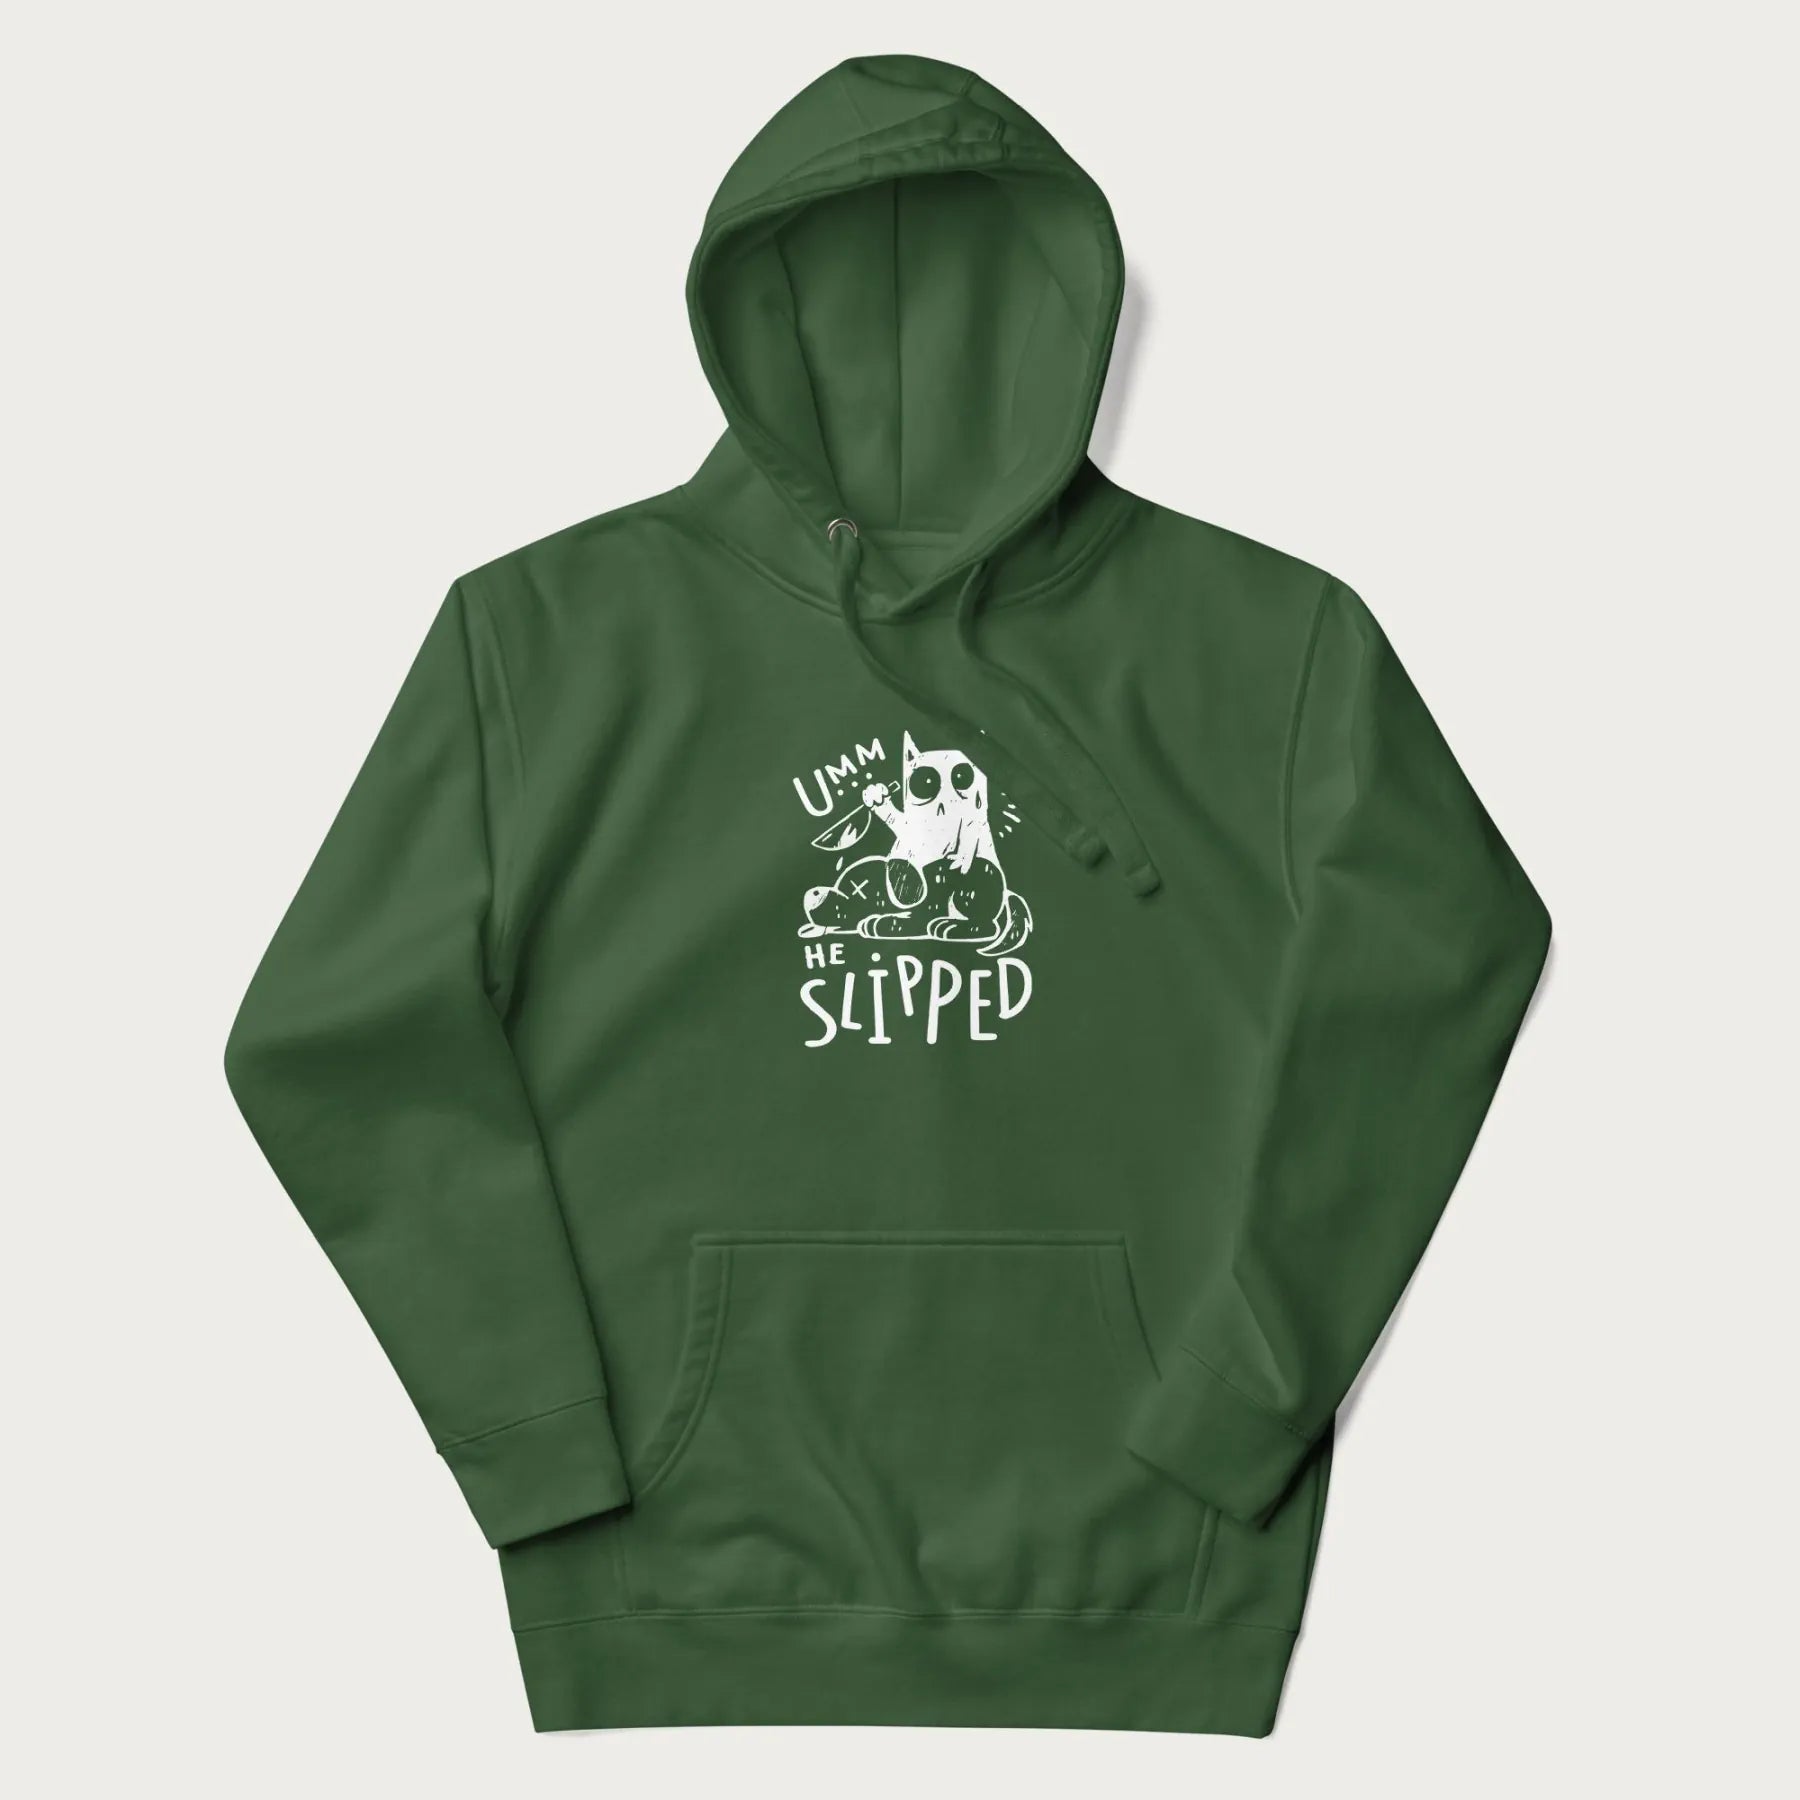 Green hoodie with a graphic of a white cat holding a knife over a dog with a funny phrase 'Umm, He Slipped'.